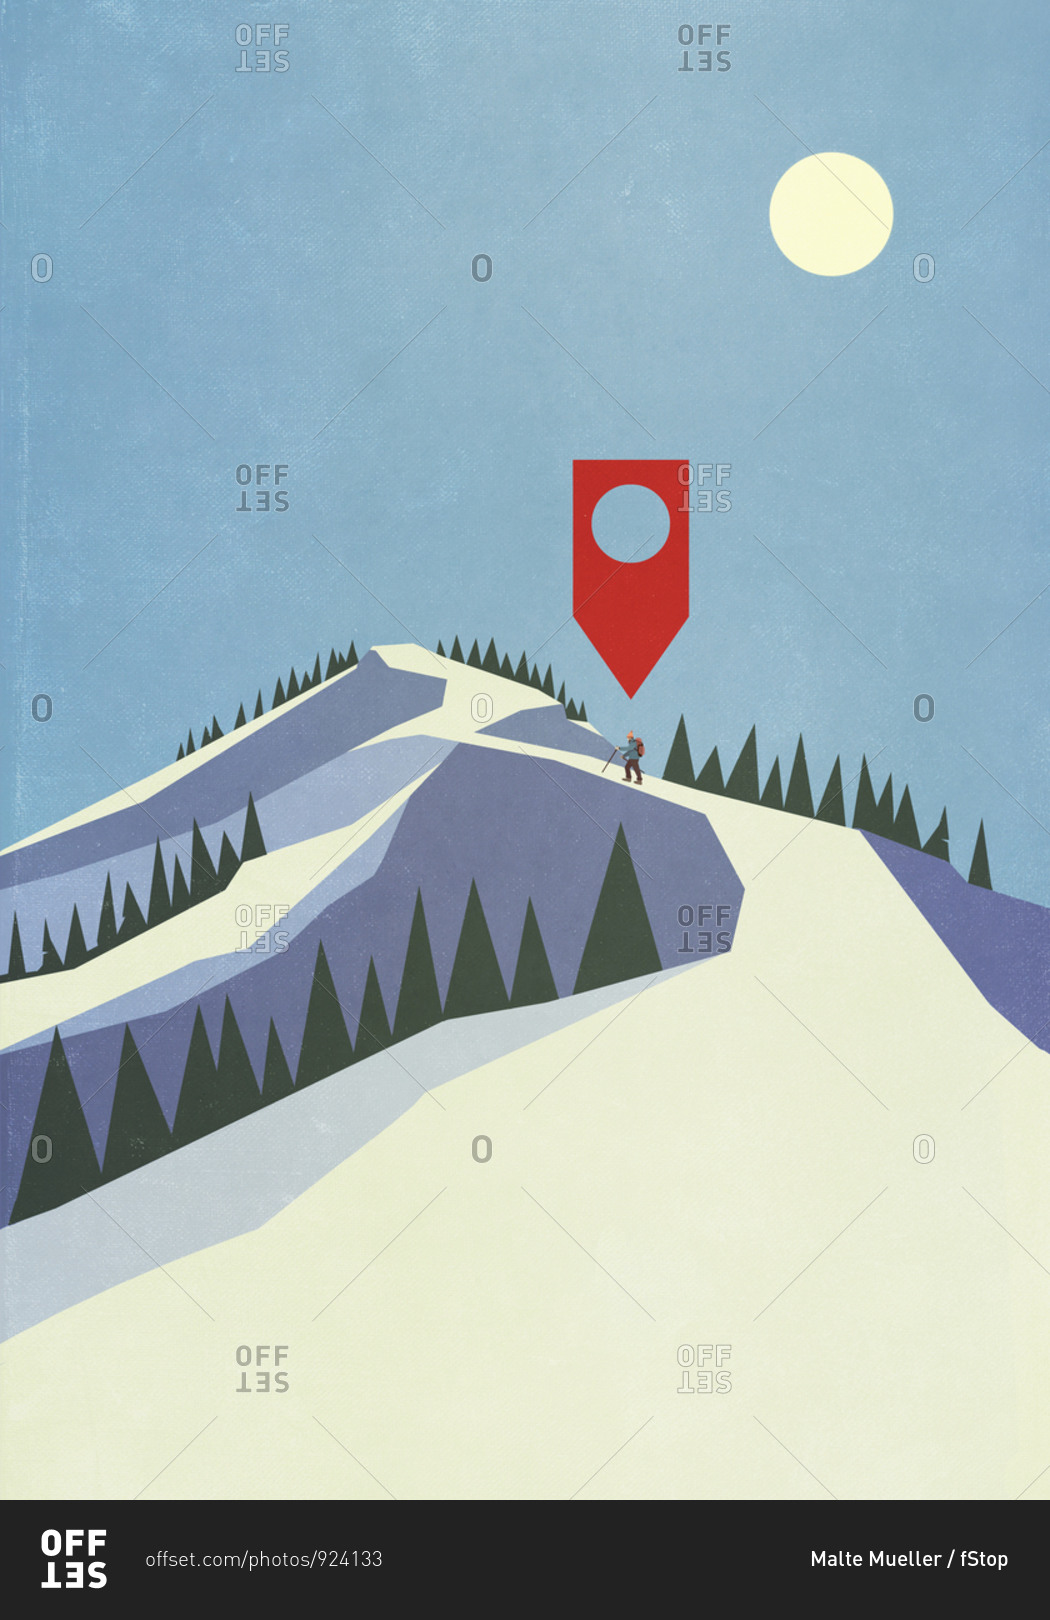 Map pin icon above person mountaineering on snowy mountain